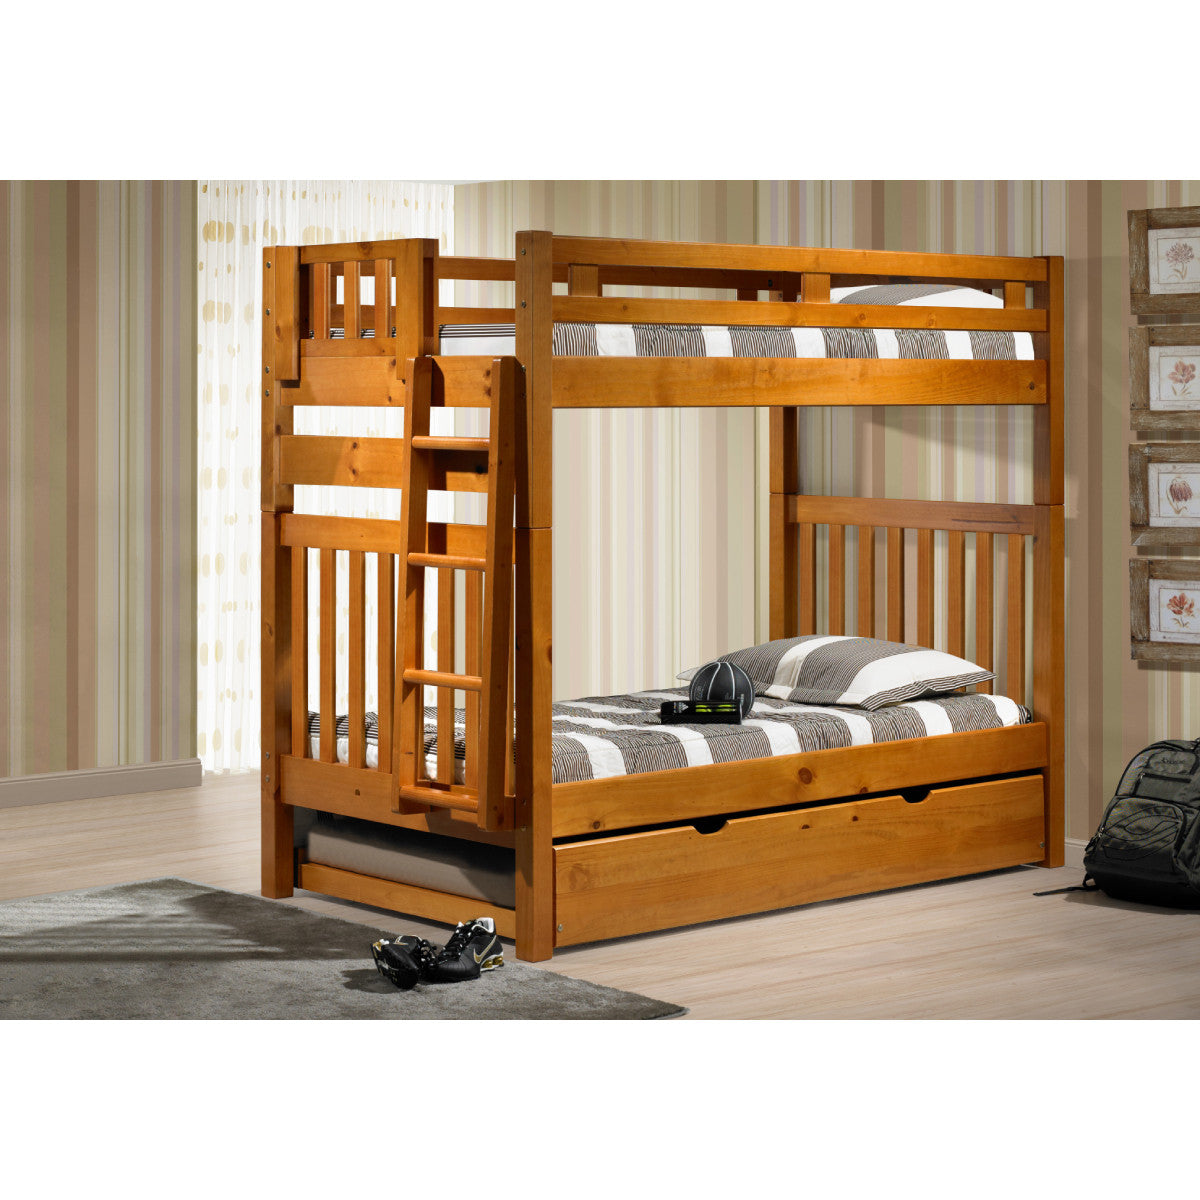 TWIN/TWIN TALL MISSION SHORT LADDER BUNK BED WITH TRUNDLE BED HONEY FINISH